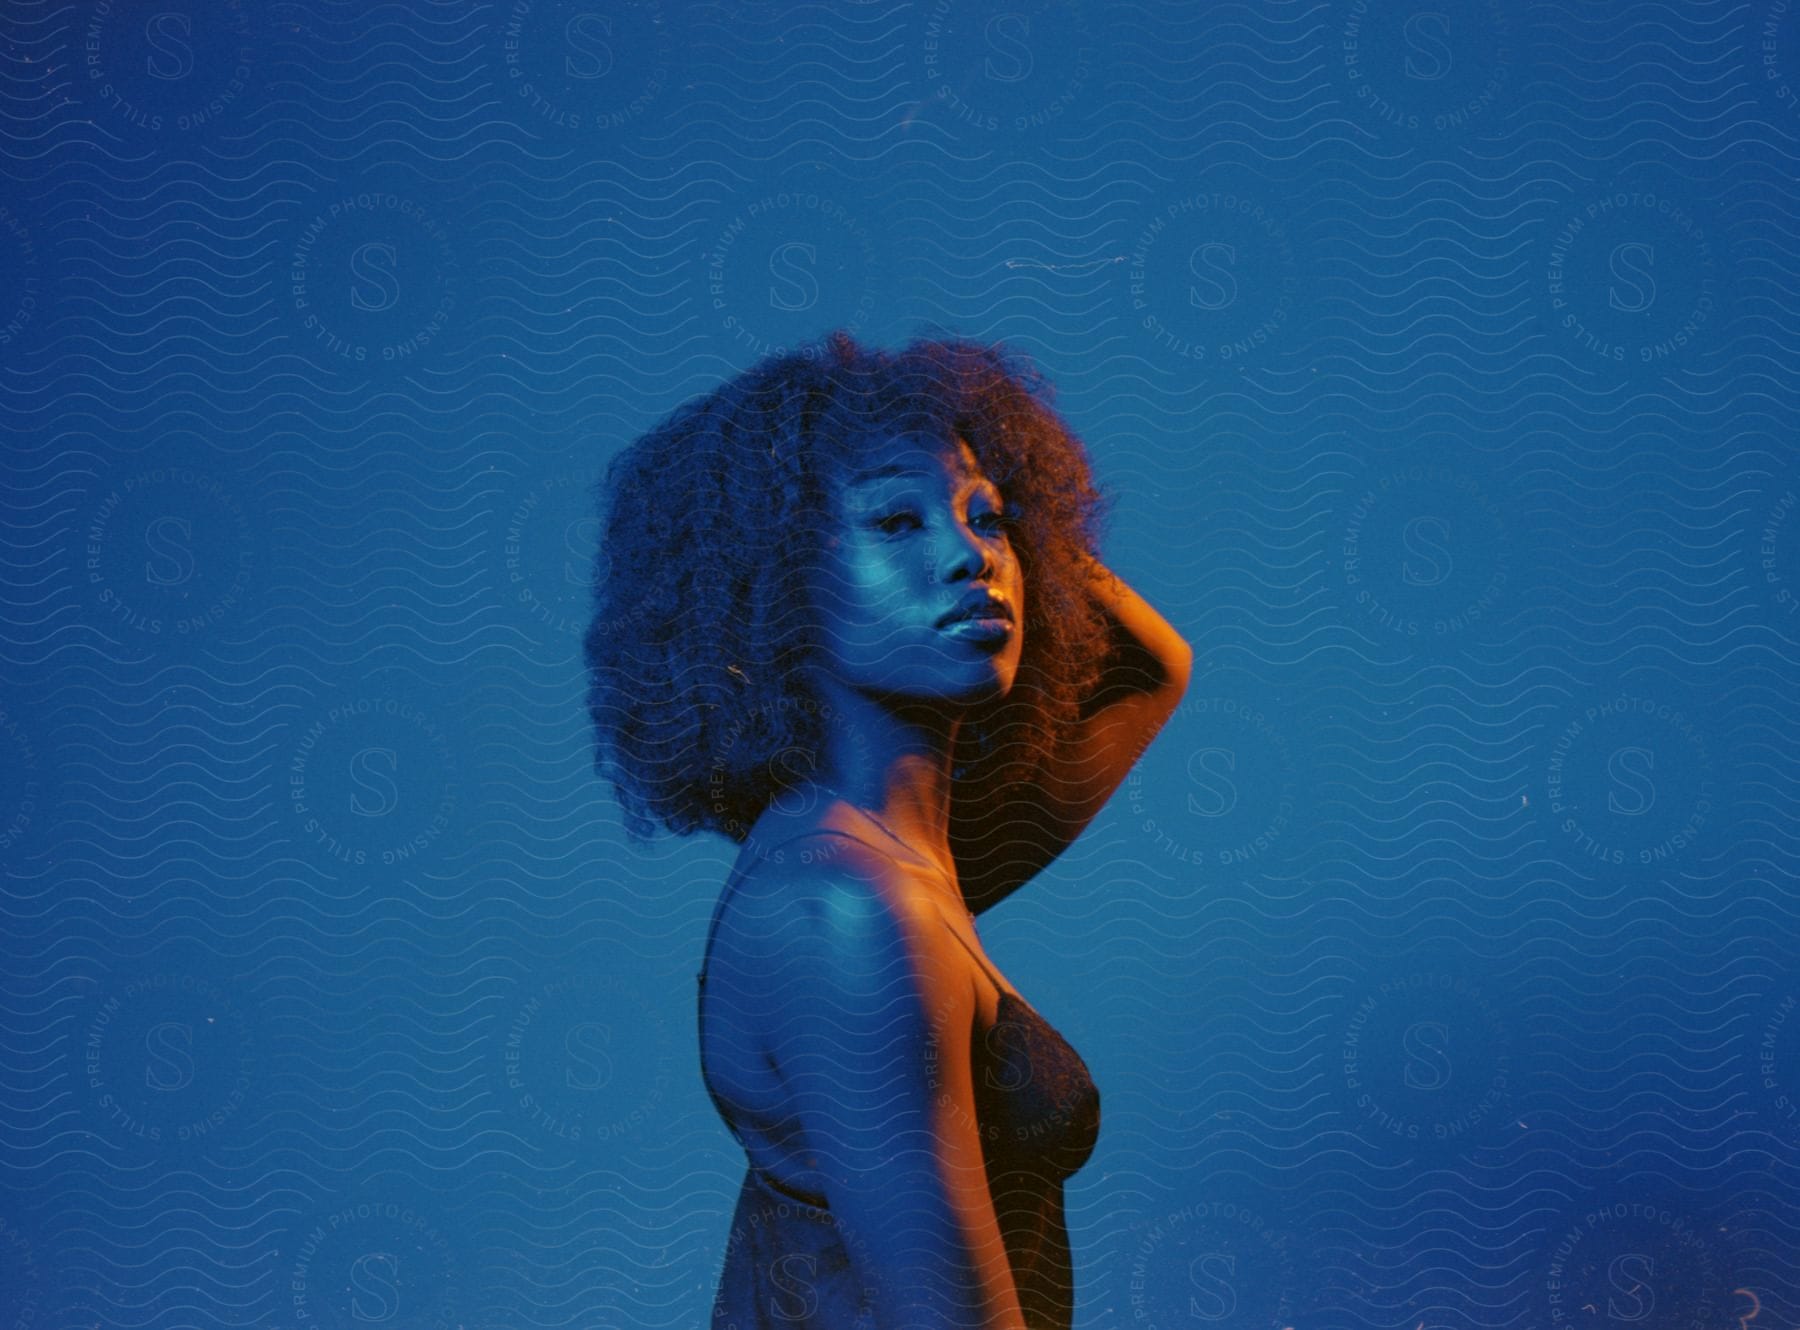 Black woman with an afro under blue and orange contrasting lights